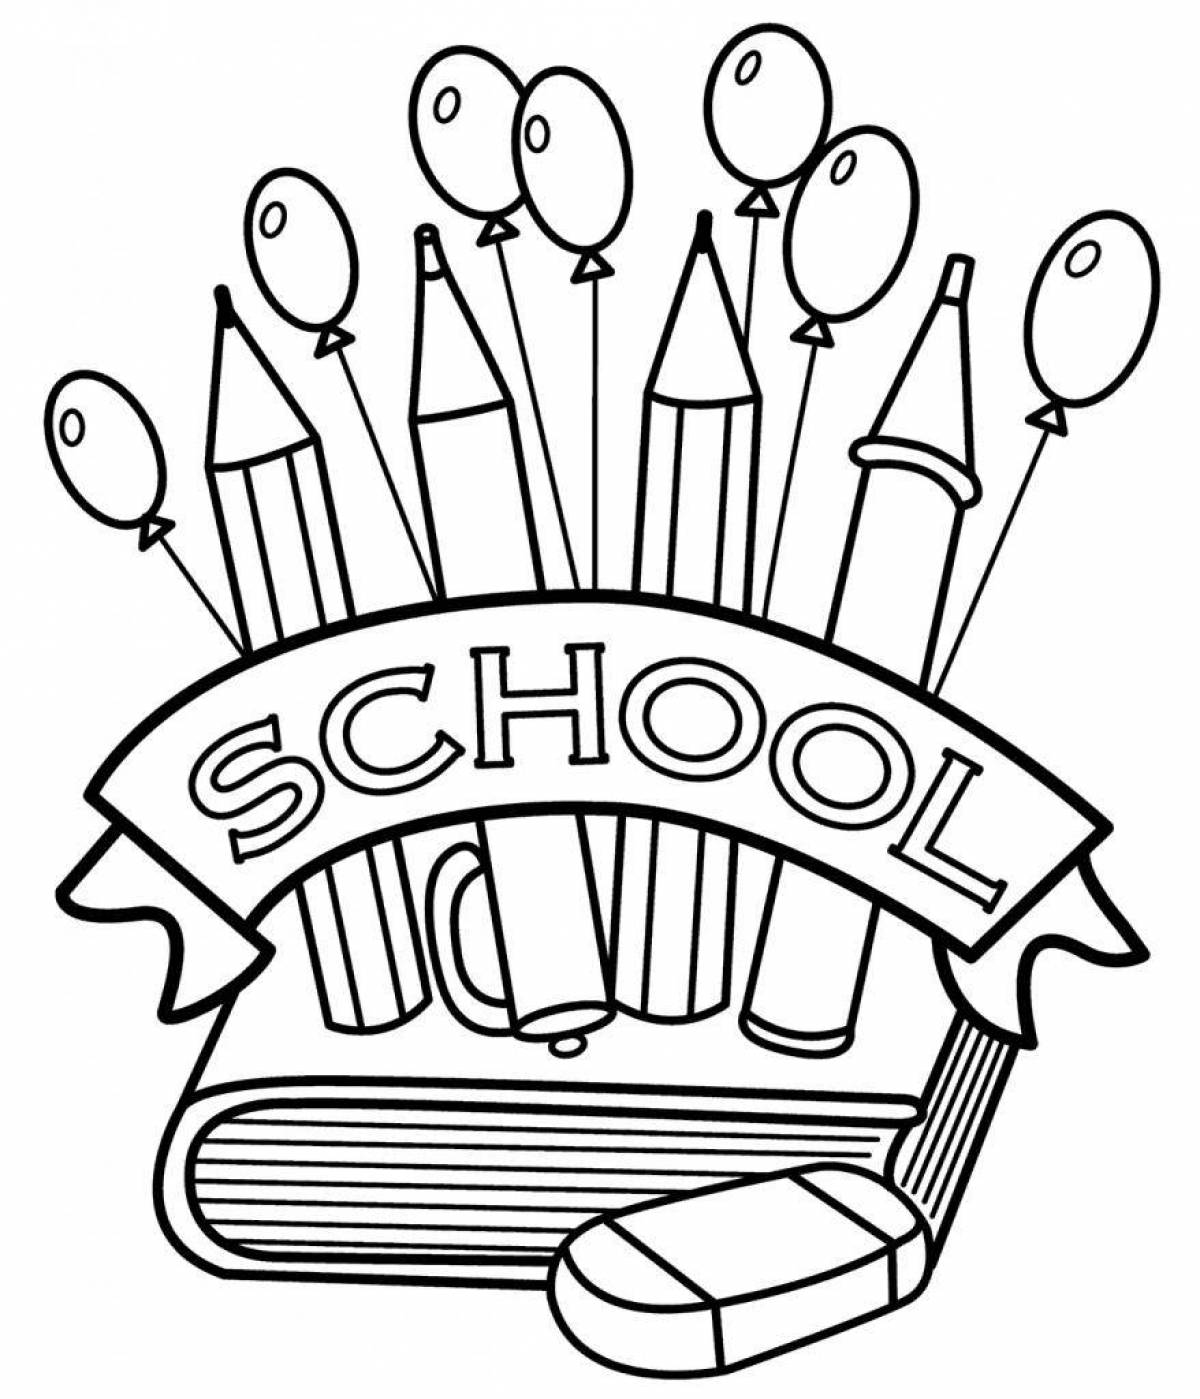 Colorful gorgeous happy birthday school coloring page